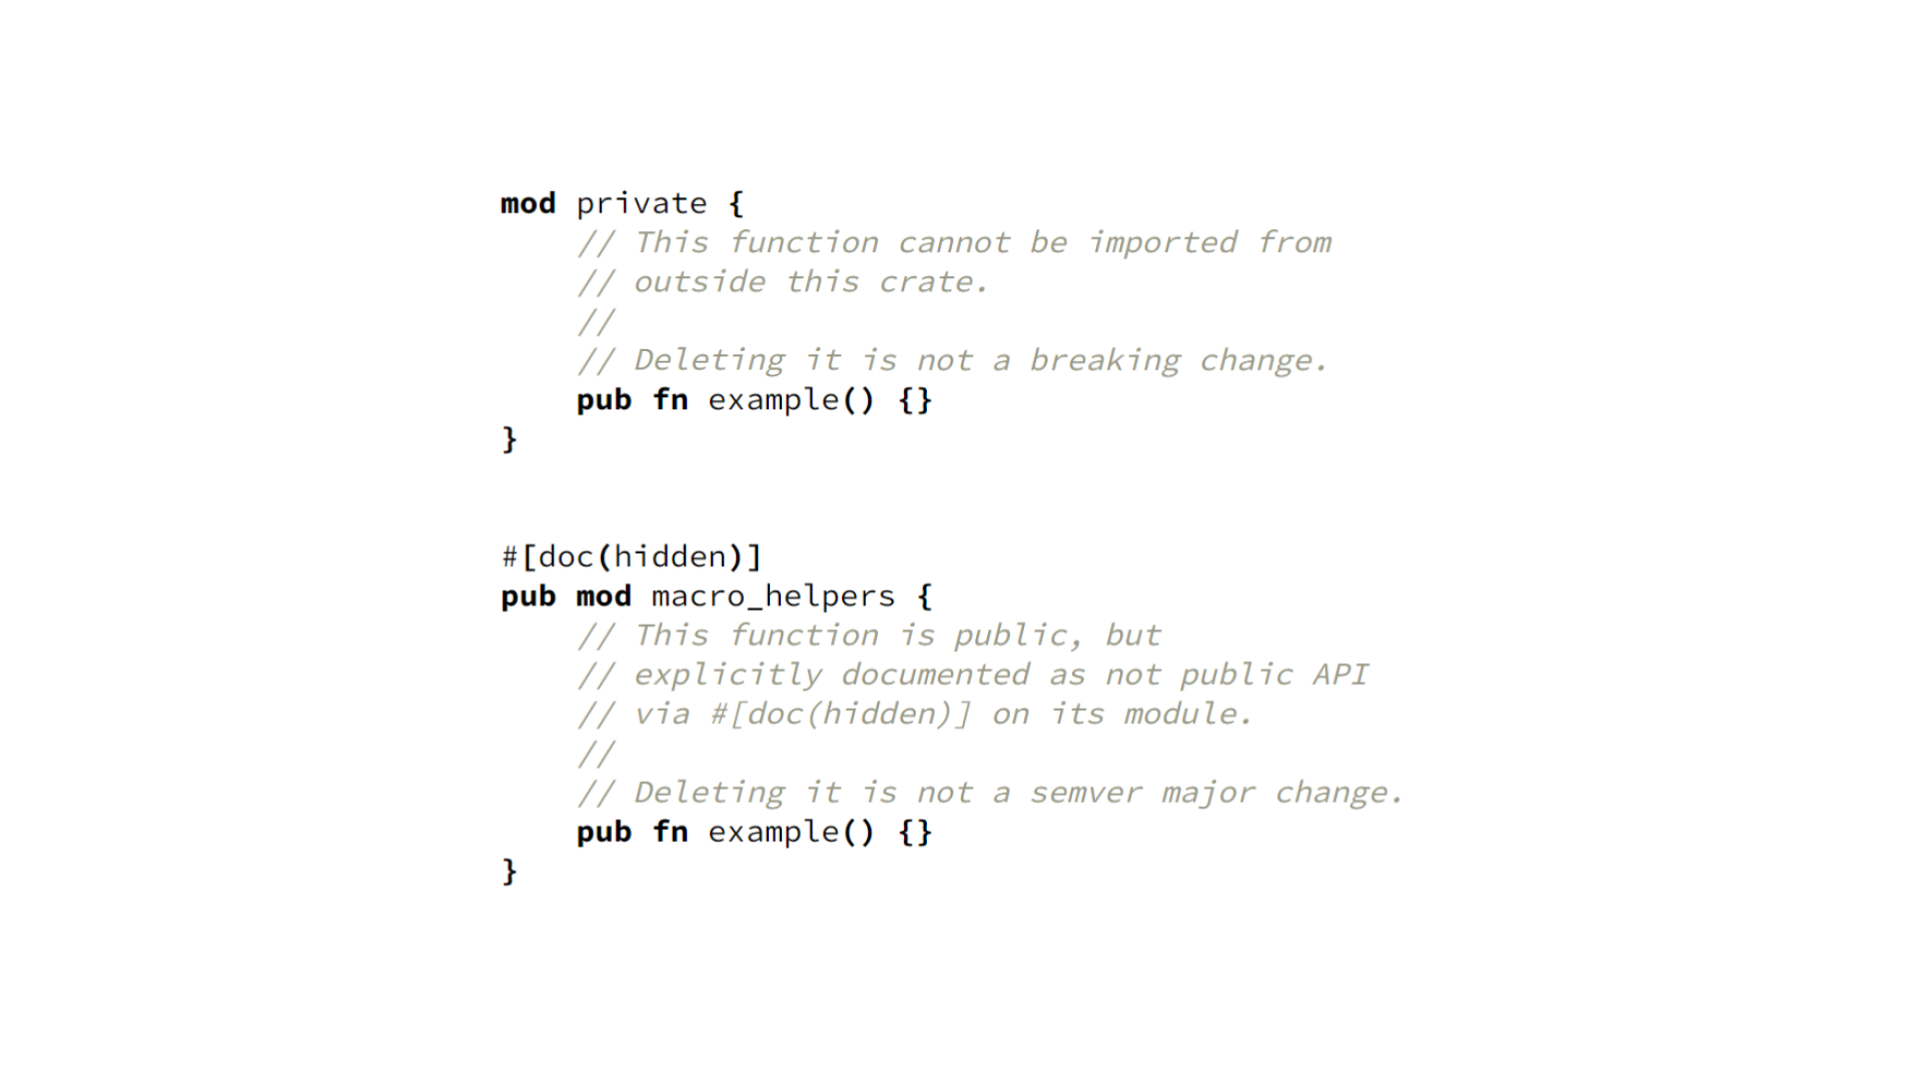 Two blocks of code. The first shows a public function defined inside a private module — even though it's public, the function cannot be imported from outside its crate. Deleting it is not a breaking change. The second block shows a public module marked `#[doc(hidden)]`, and a public function defined inside it. Even though this function can be imported, it is not considered public API since it would have to be imported from a `#[doc(hidden)]` module. Deleting it is not a SemVer major change either.